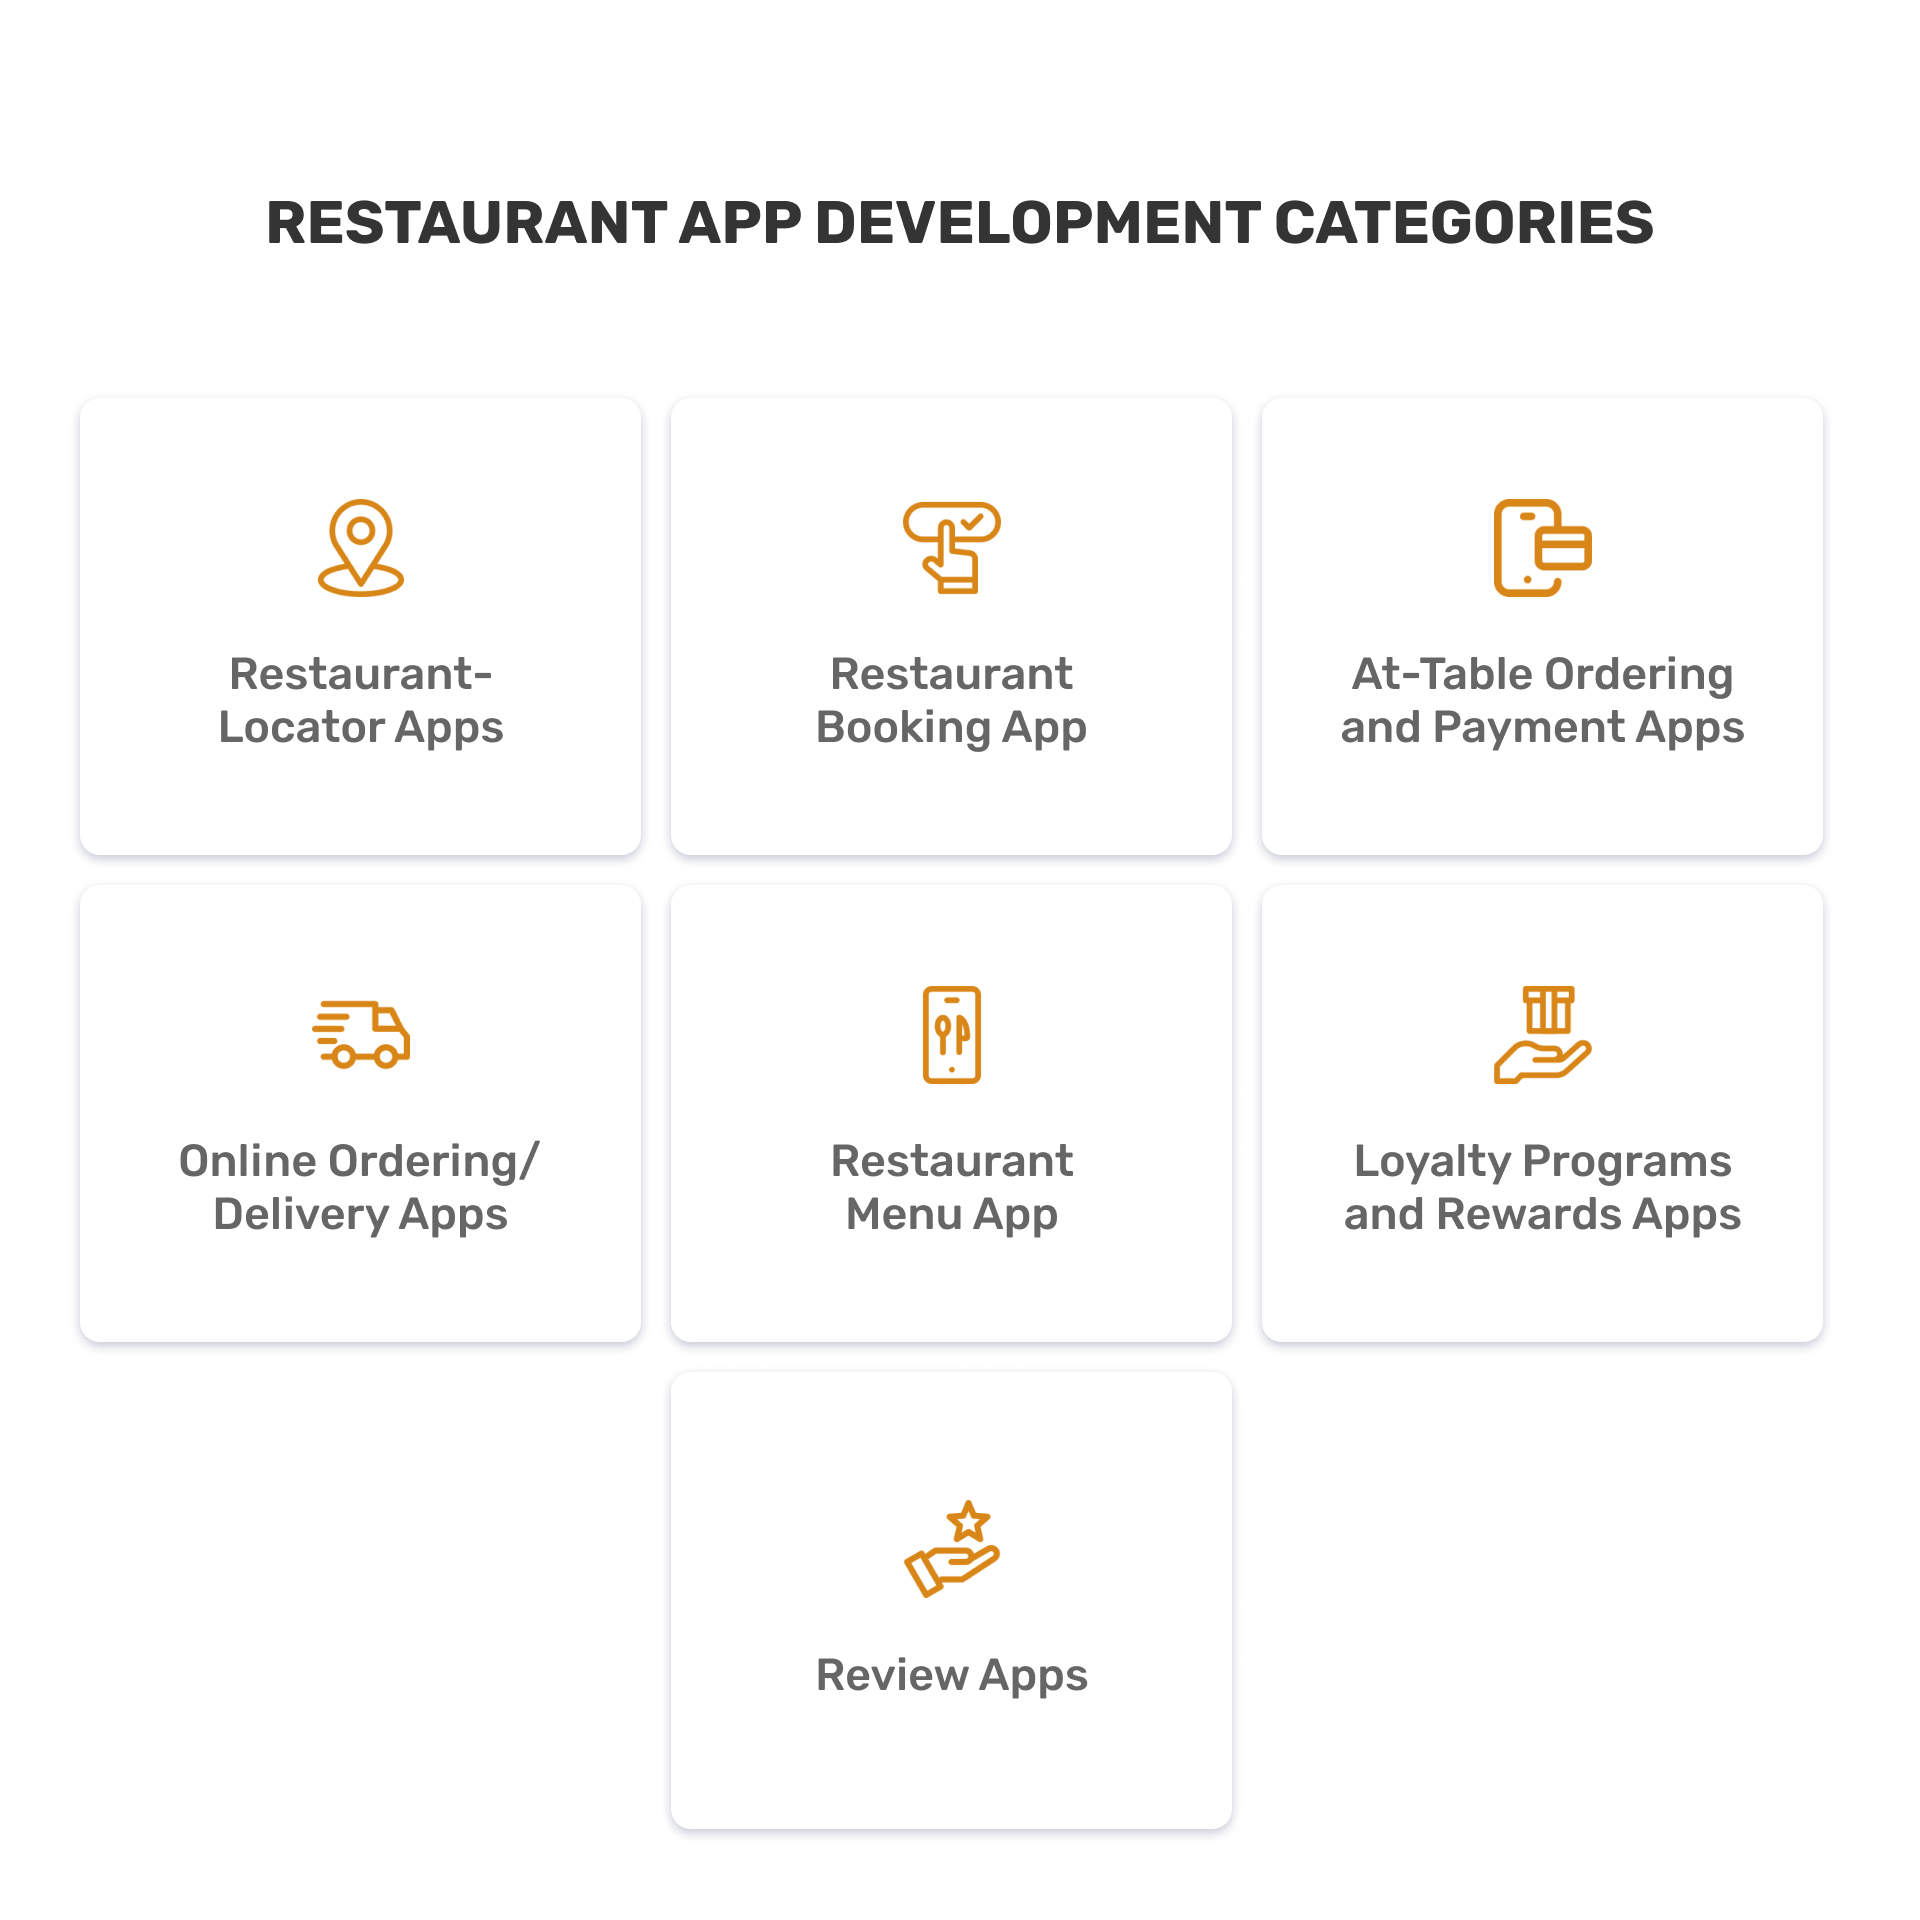 Here’s how we would define restaurant apps. Look at the primary features and categories of these applications.